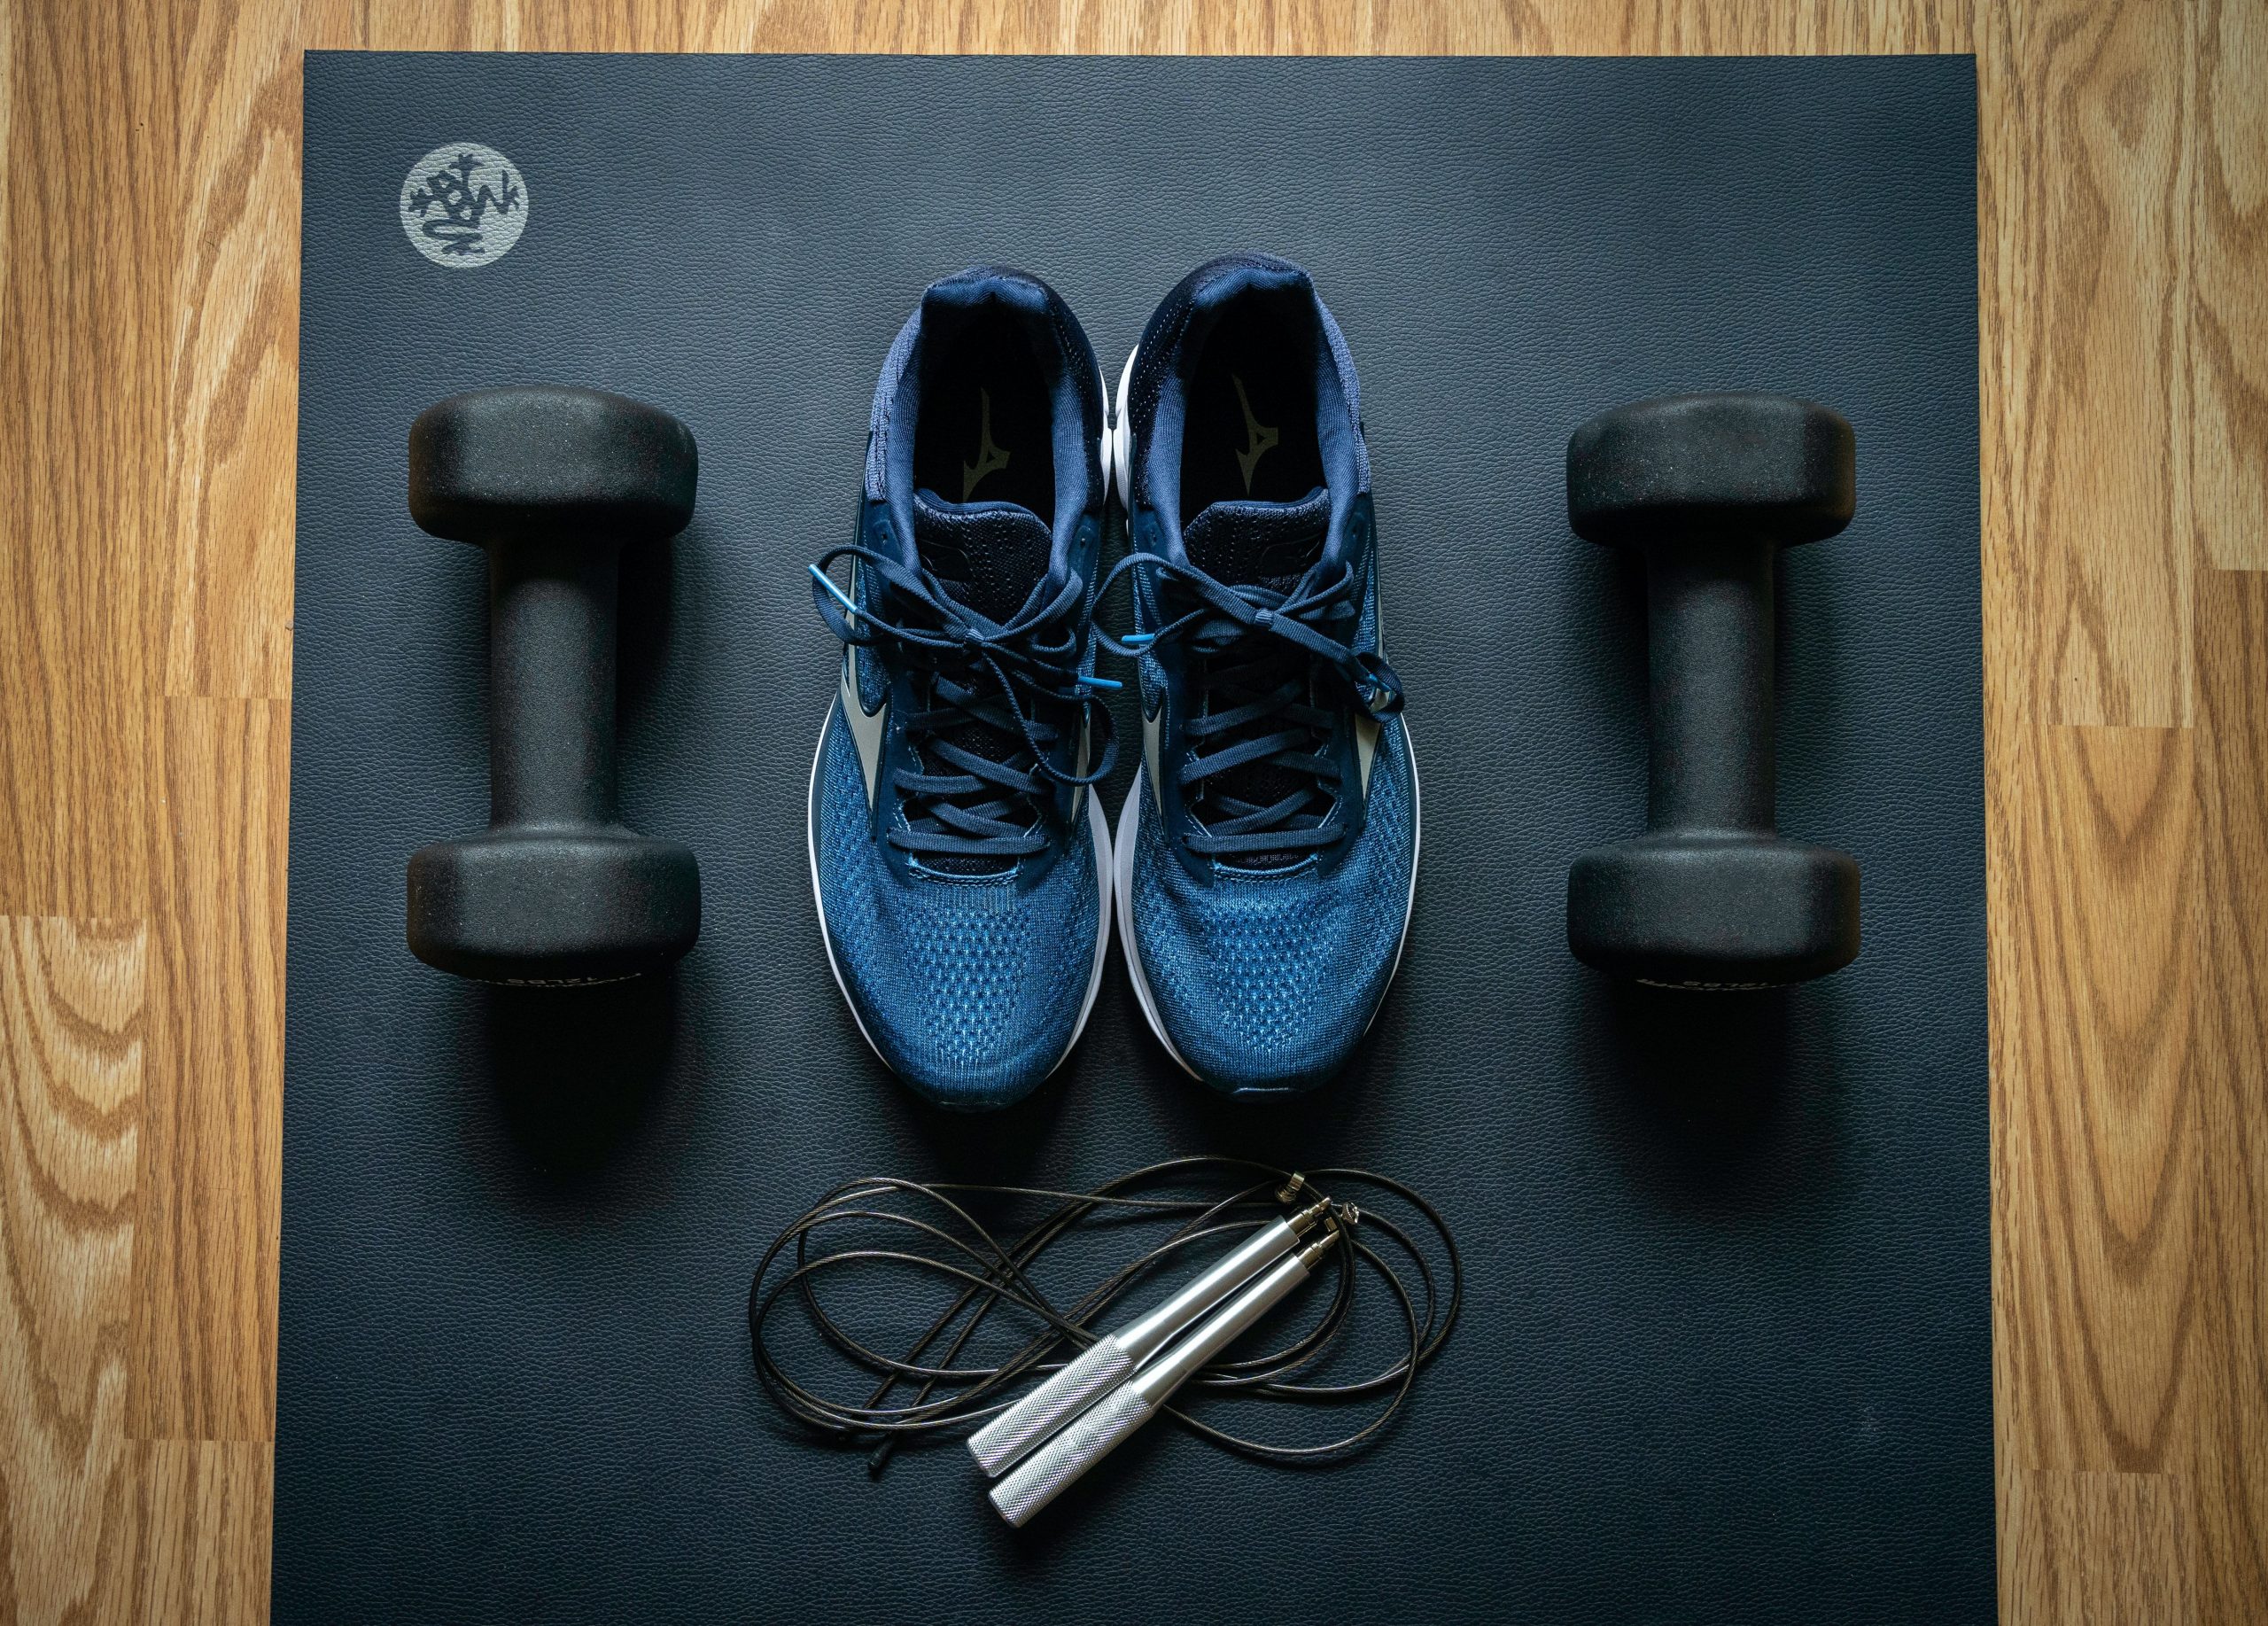 Setting up a home gym? Here are a few essential fitness equipment